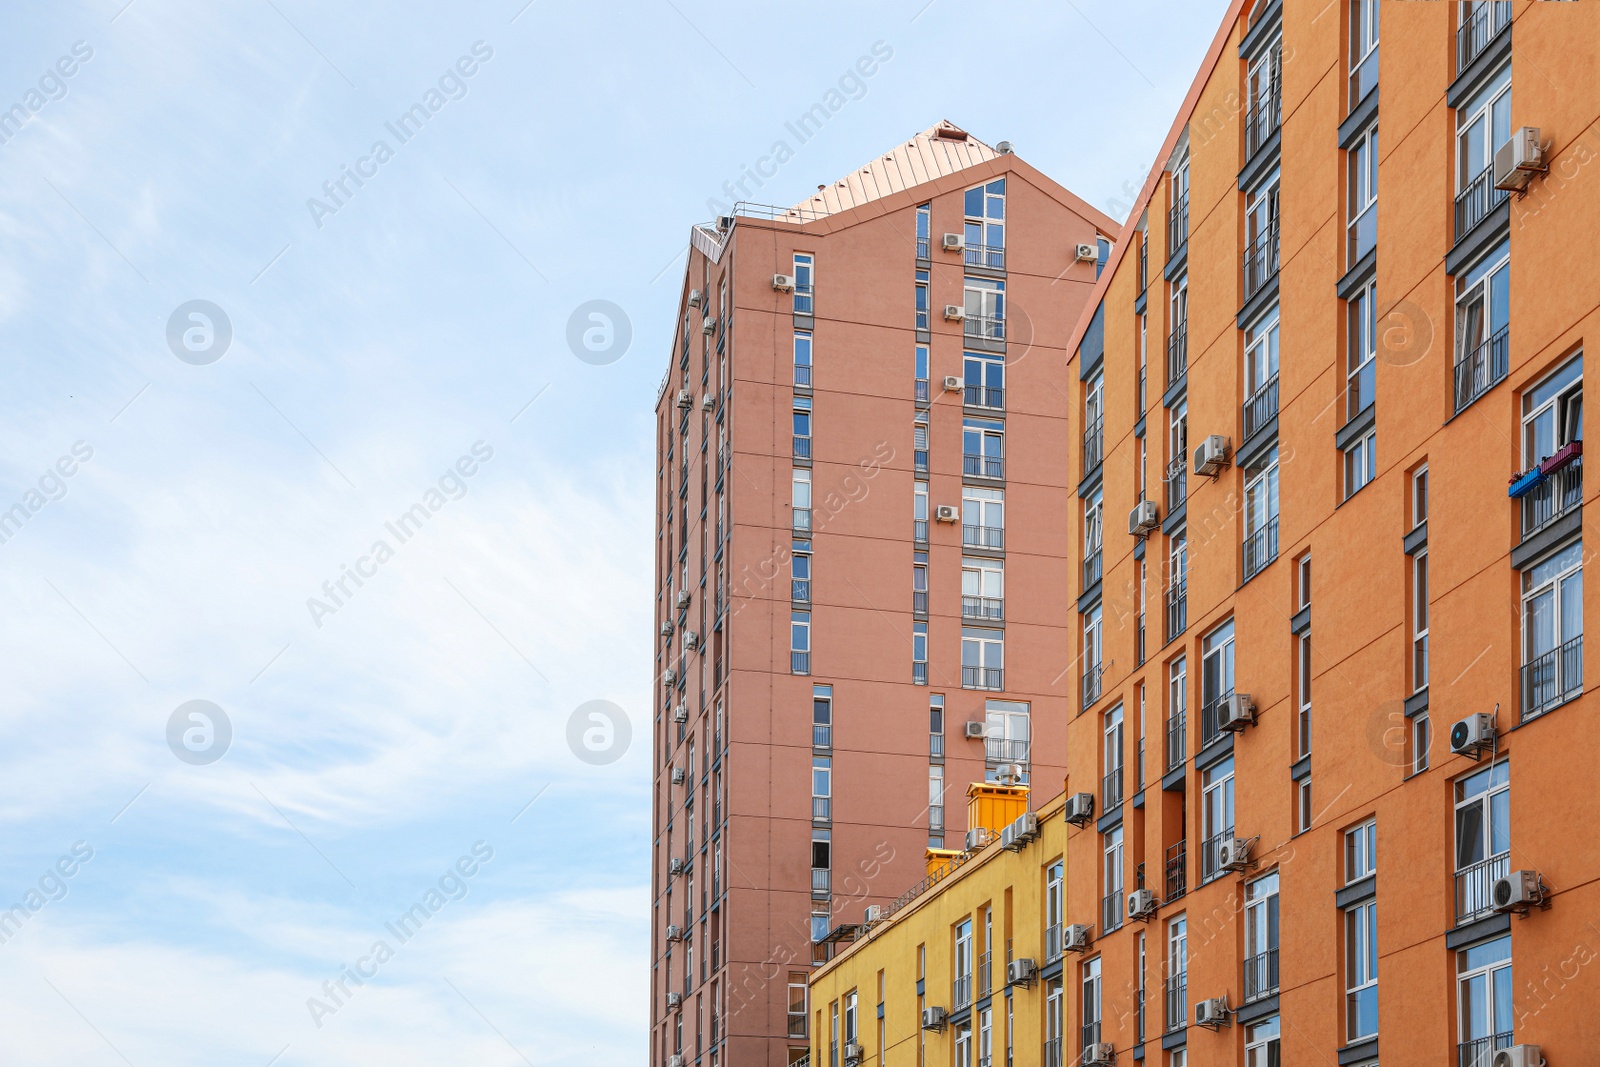 Photo of Modern buildings with windows against sky. Urban architecture